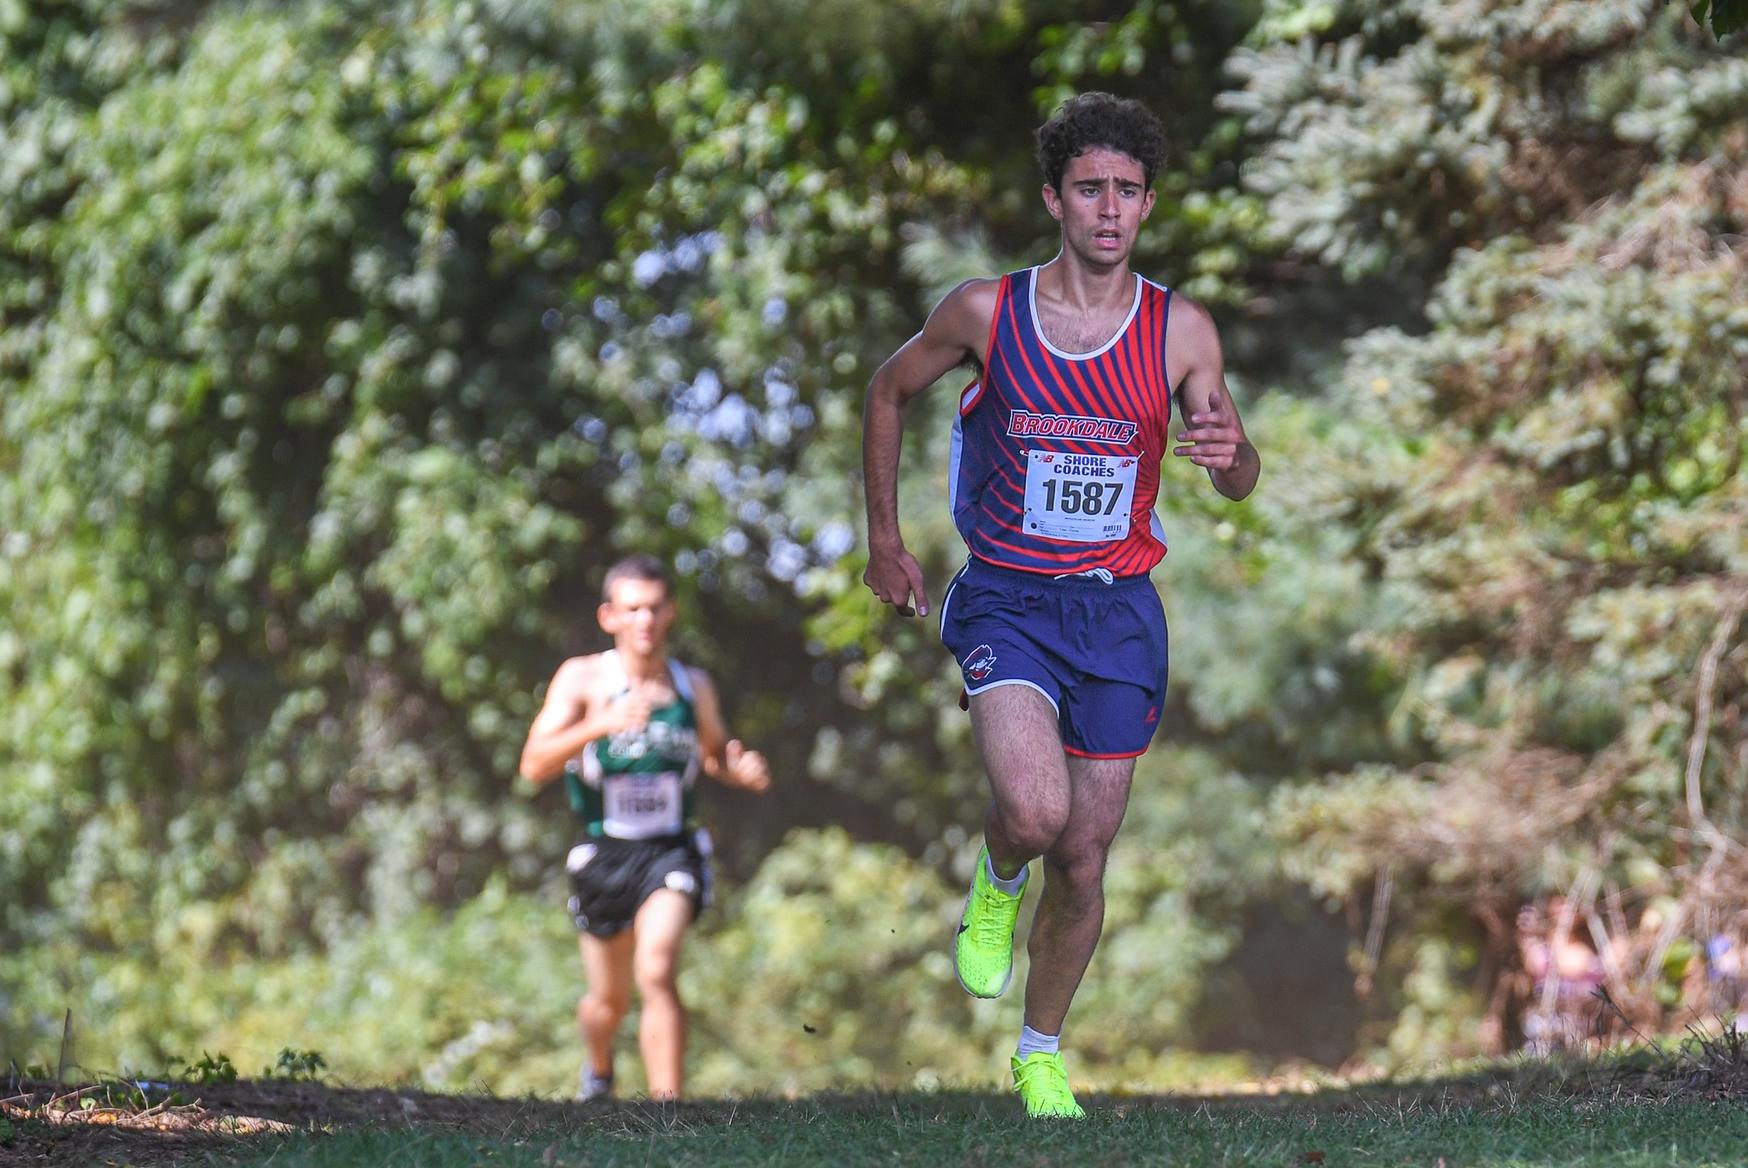 Brookdale's Purdon Captures Male National Athlete Of The Week